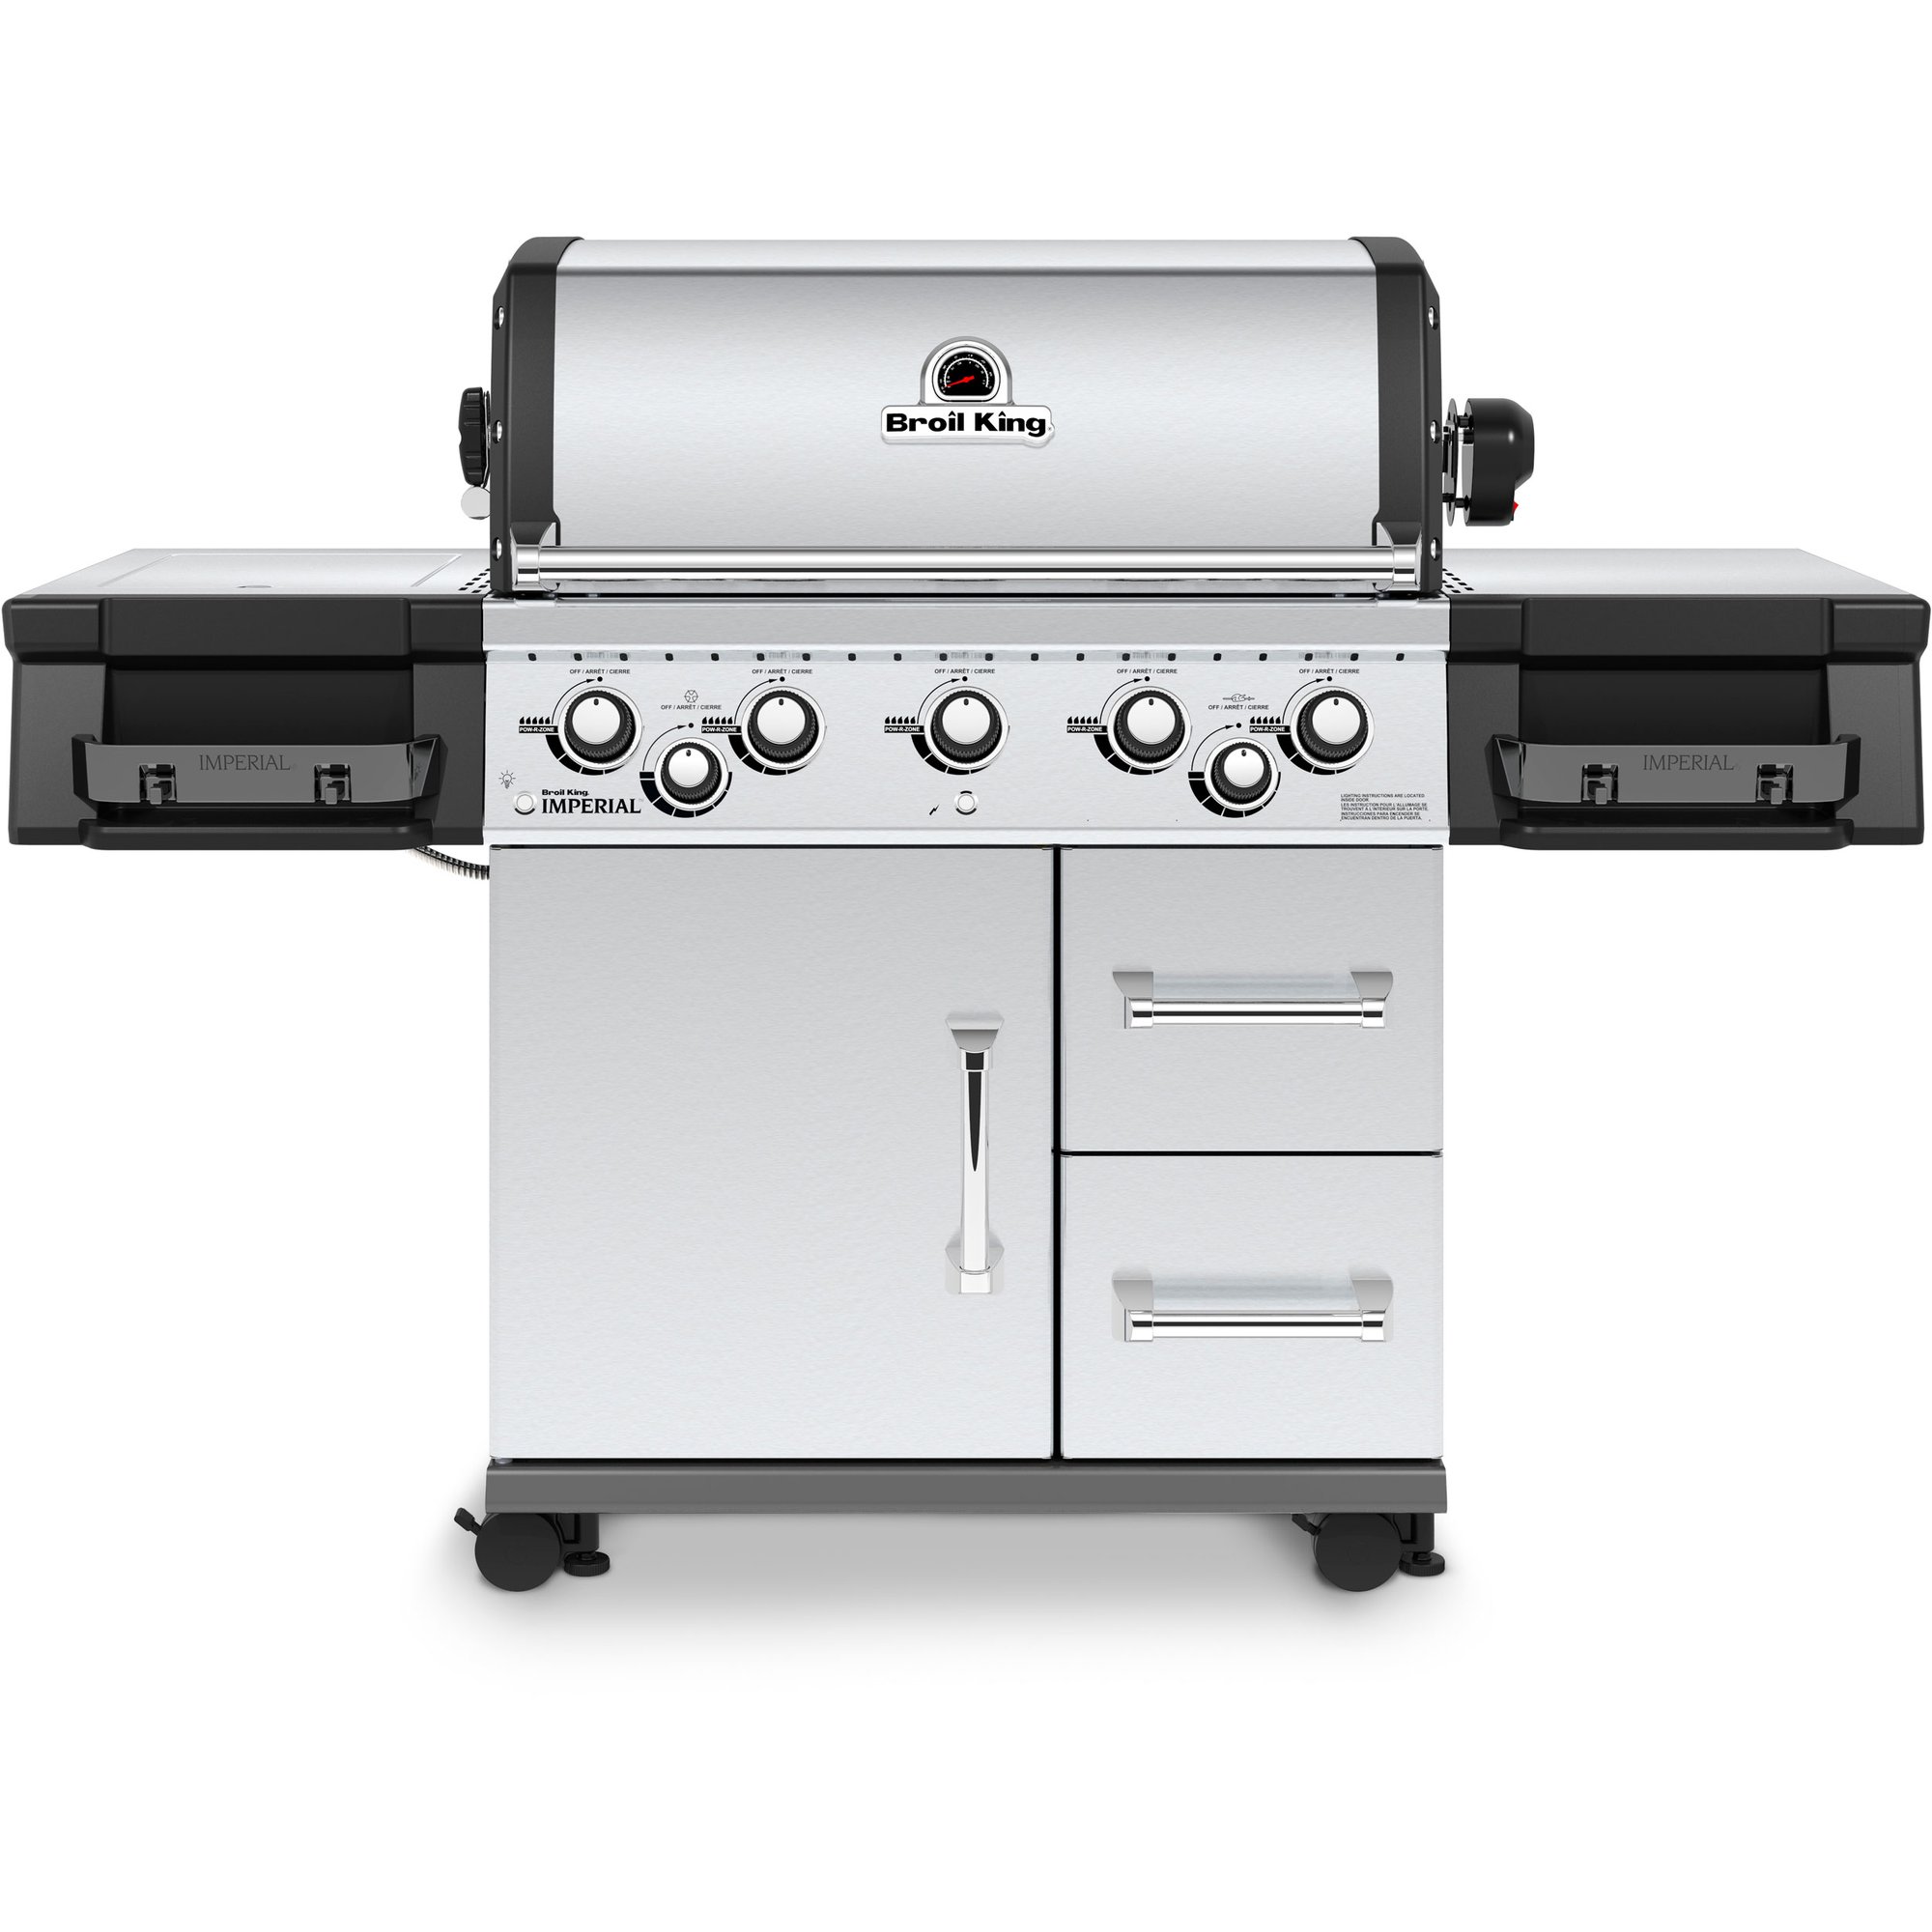 Broil King Imperial S590 Gasgrill